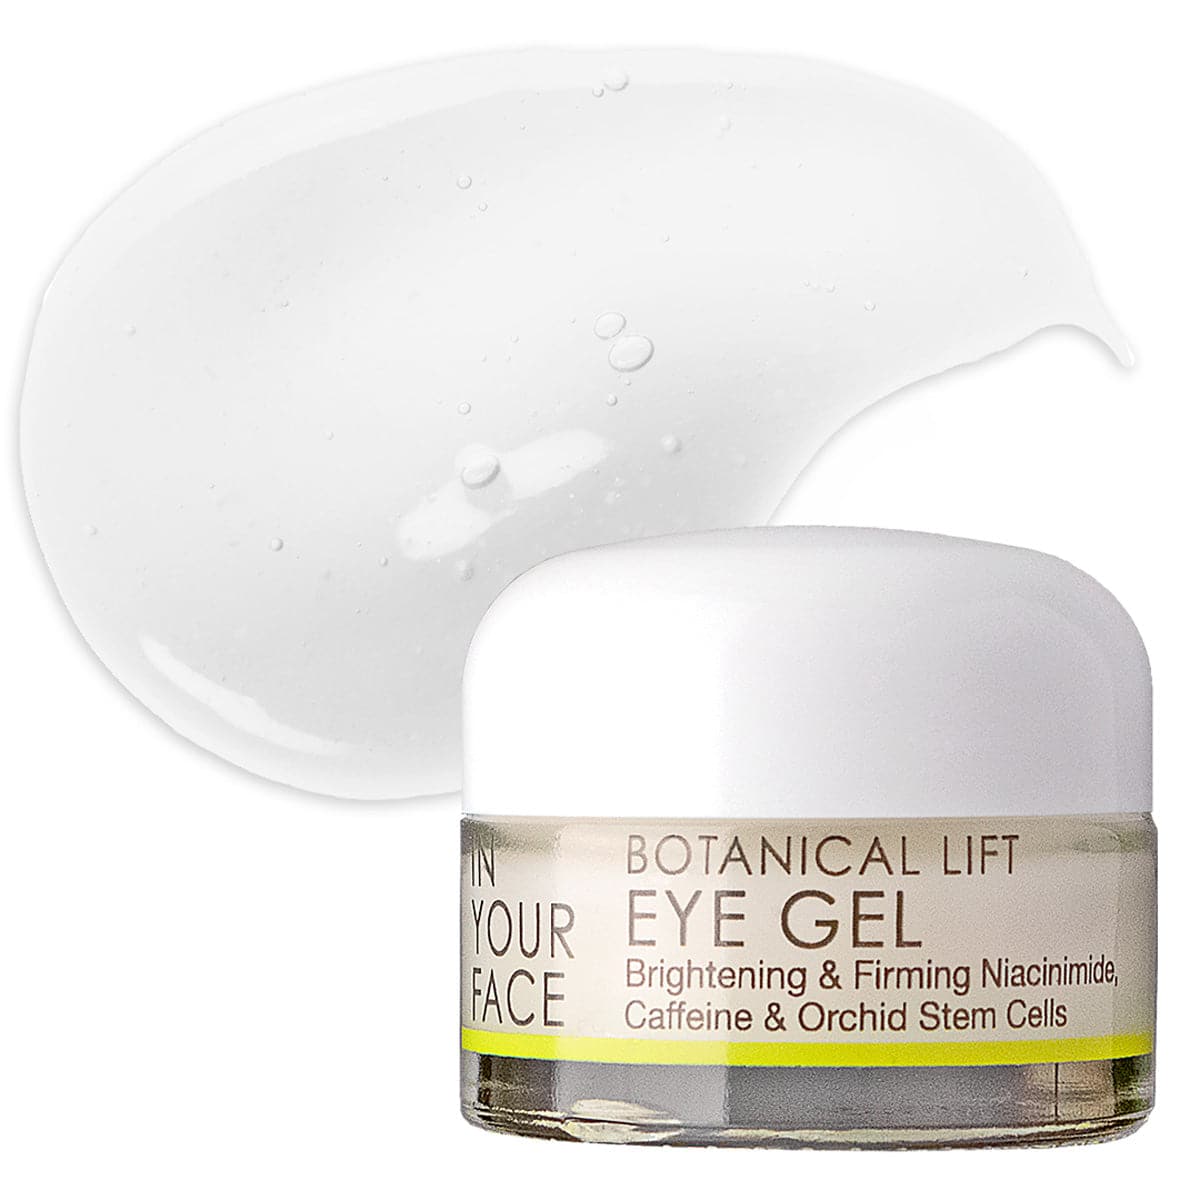 a jar of the IN YOUR FACE BOTANICAL LIFT EYE GEL. It appears to be a clear ivory color. The image says in addition to the title, "Brightening & firming niacinamide, Caffeine & Orchid Stem Cells". Next to the image is a clear white smear of the gel itself.